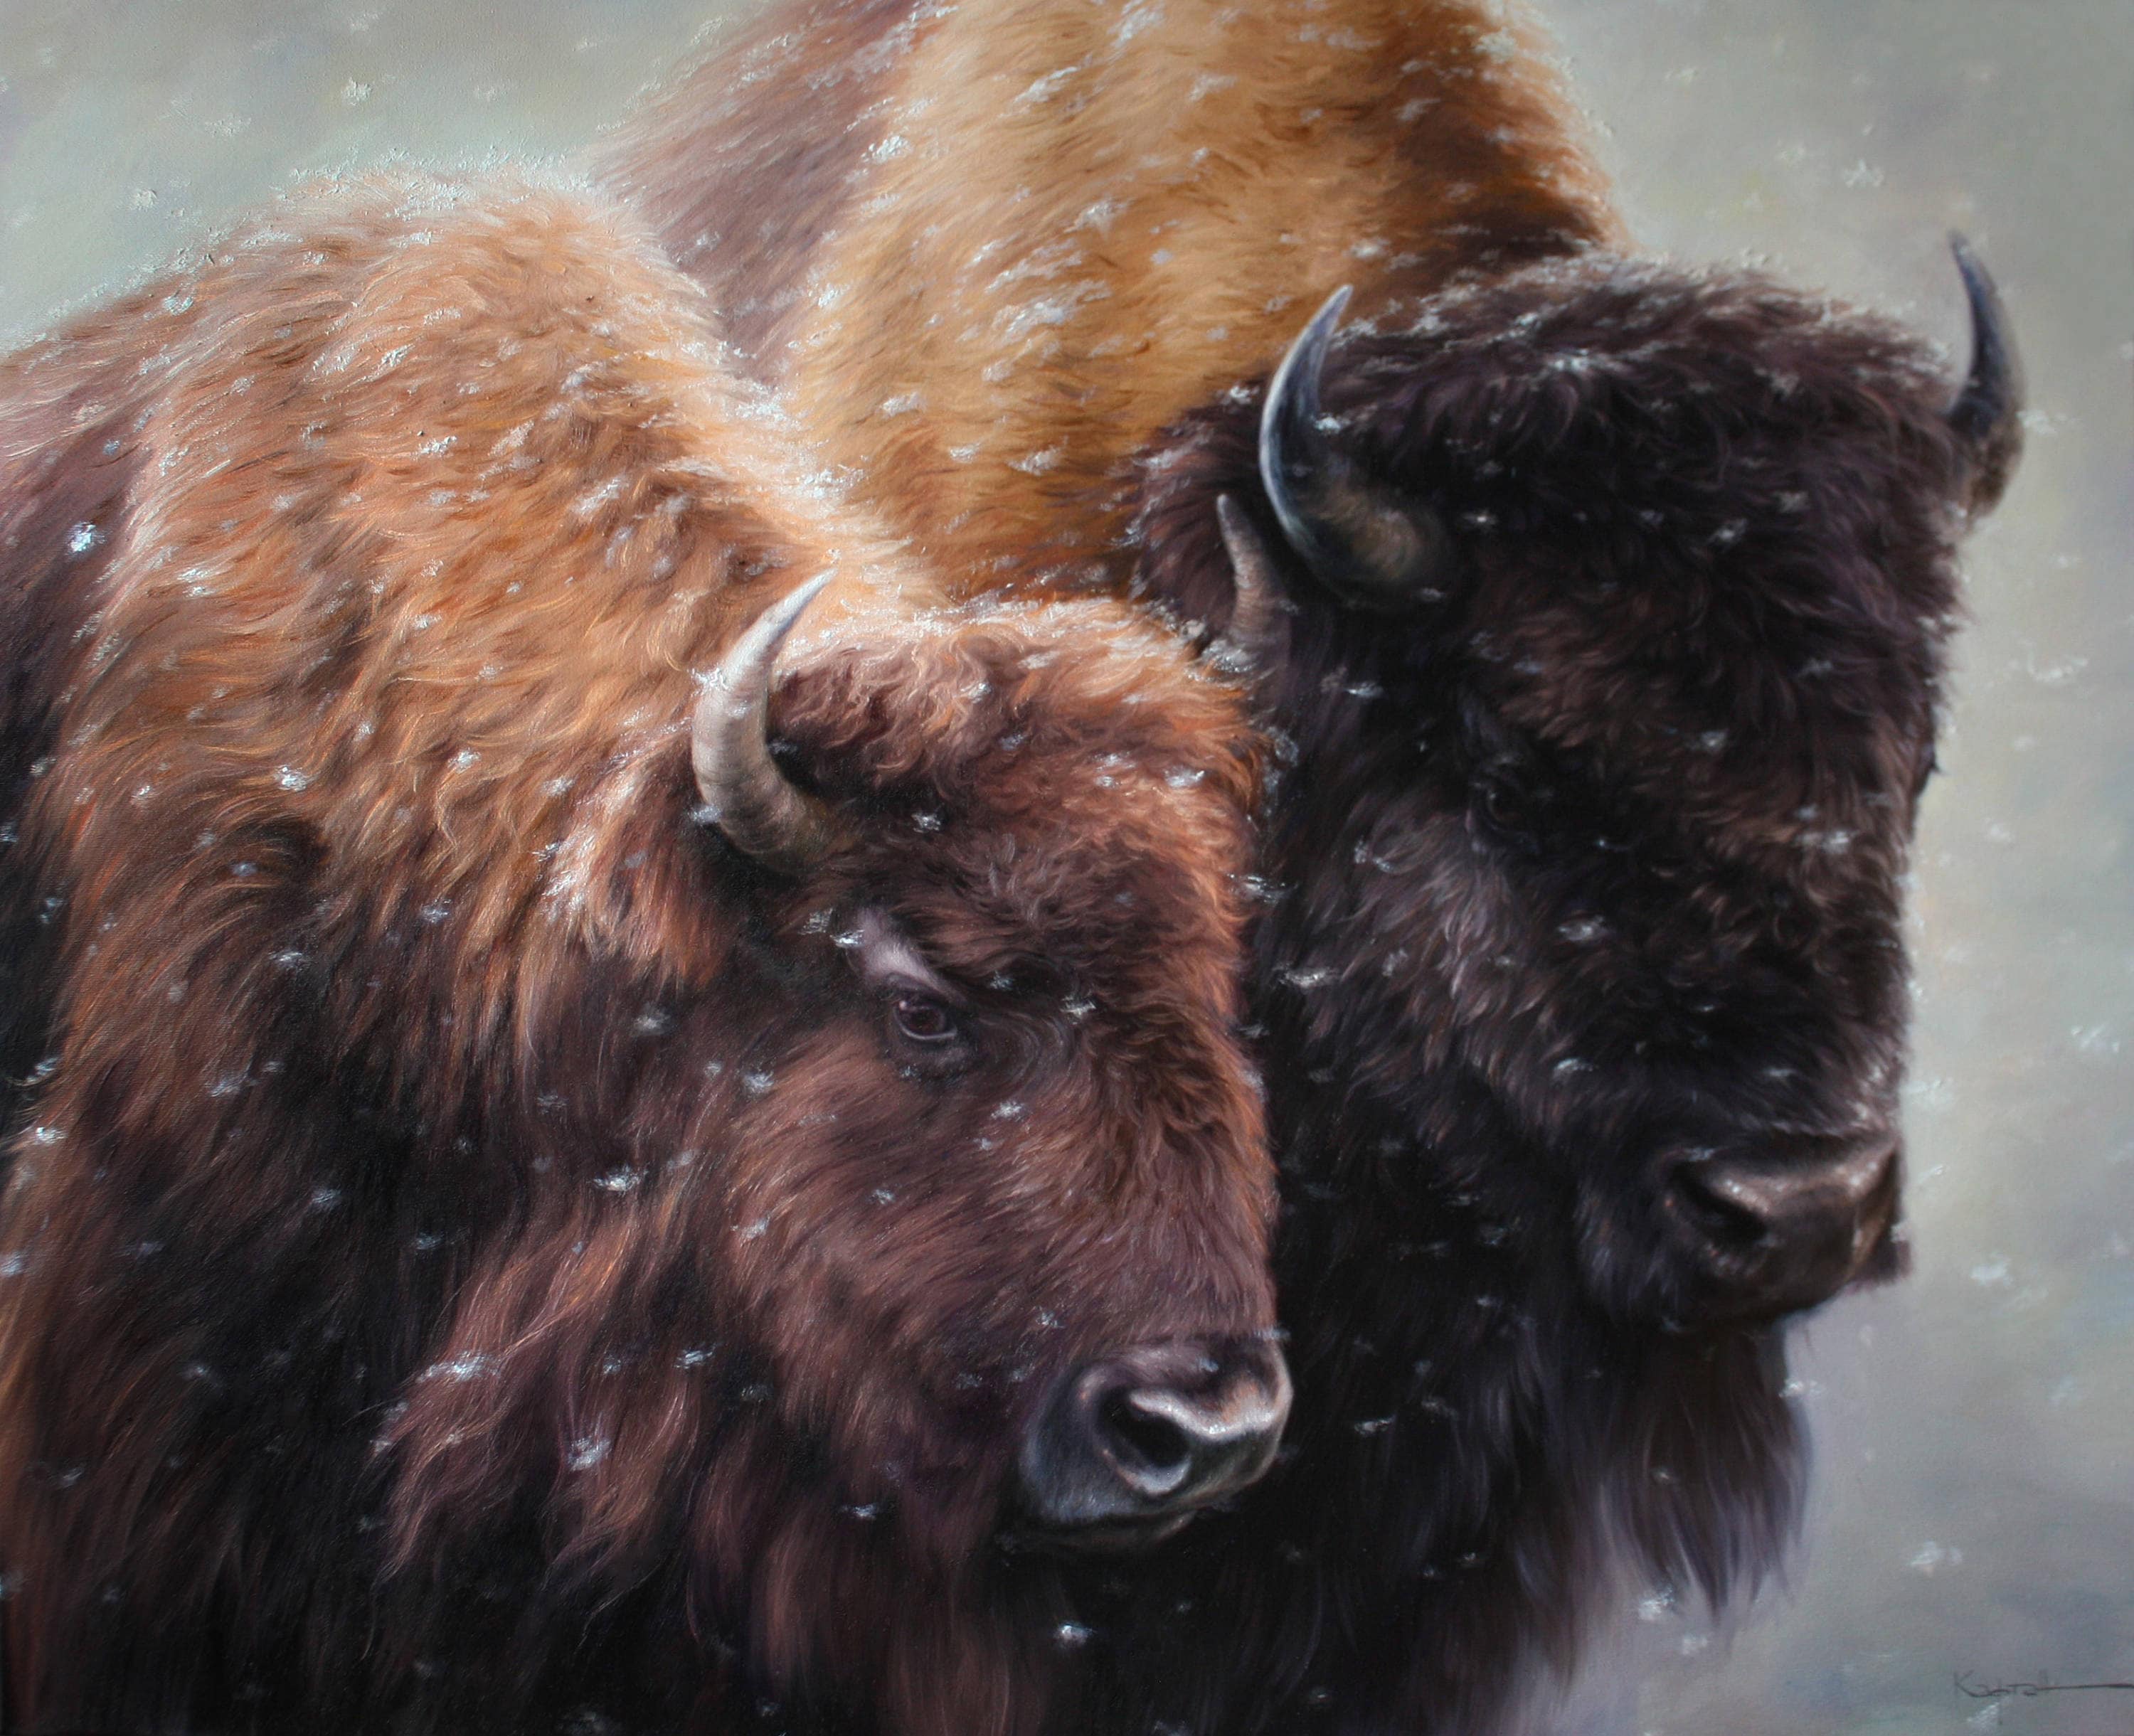 TWO Pair of Bison Oil Painting Buffalo Art | Etsy